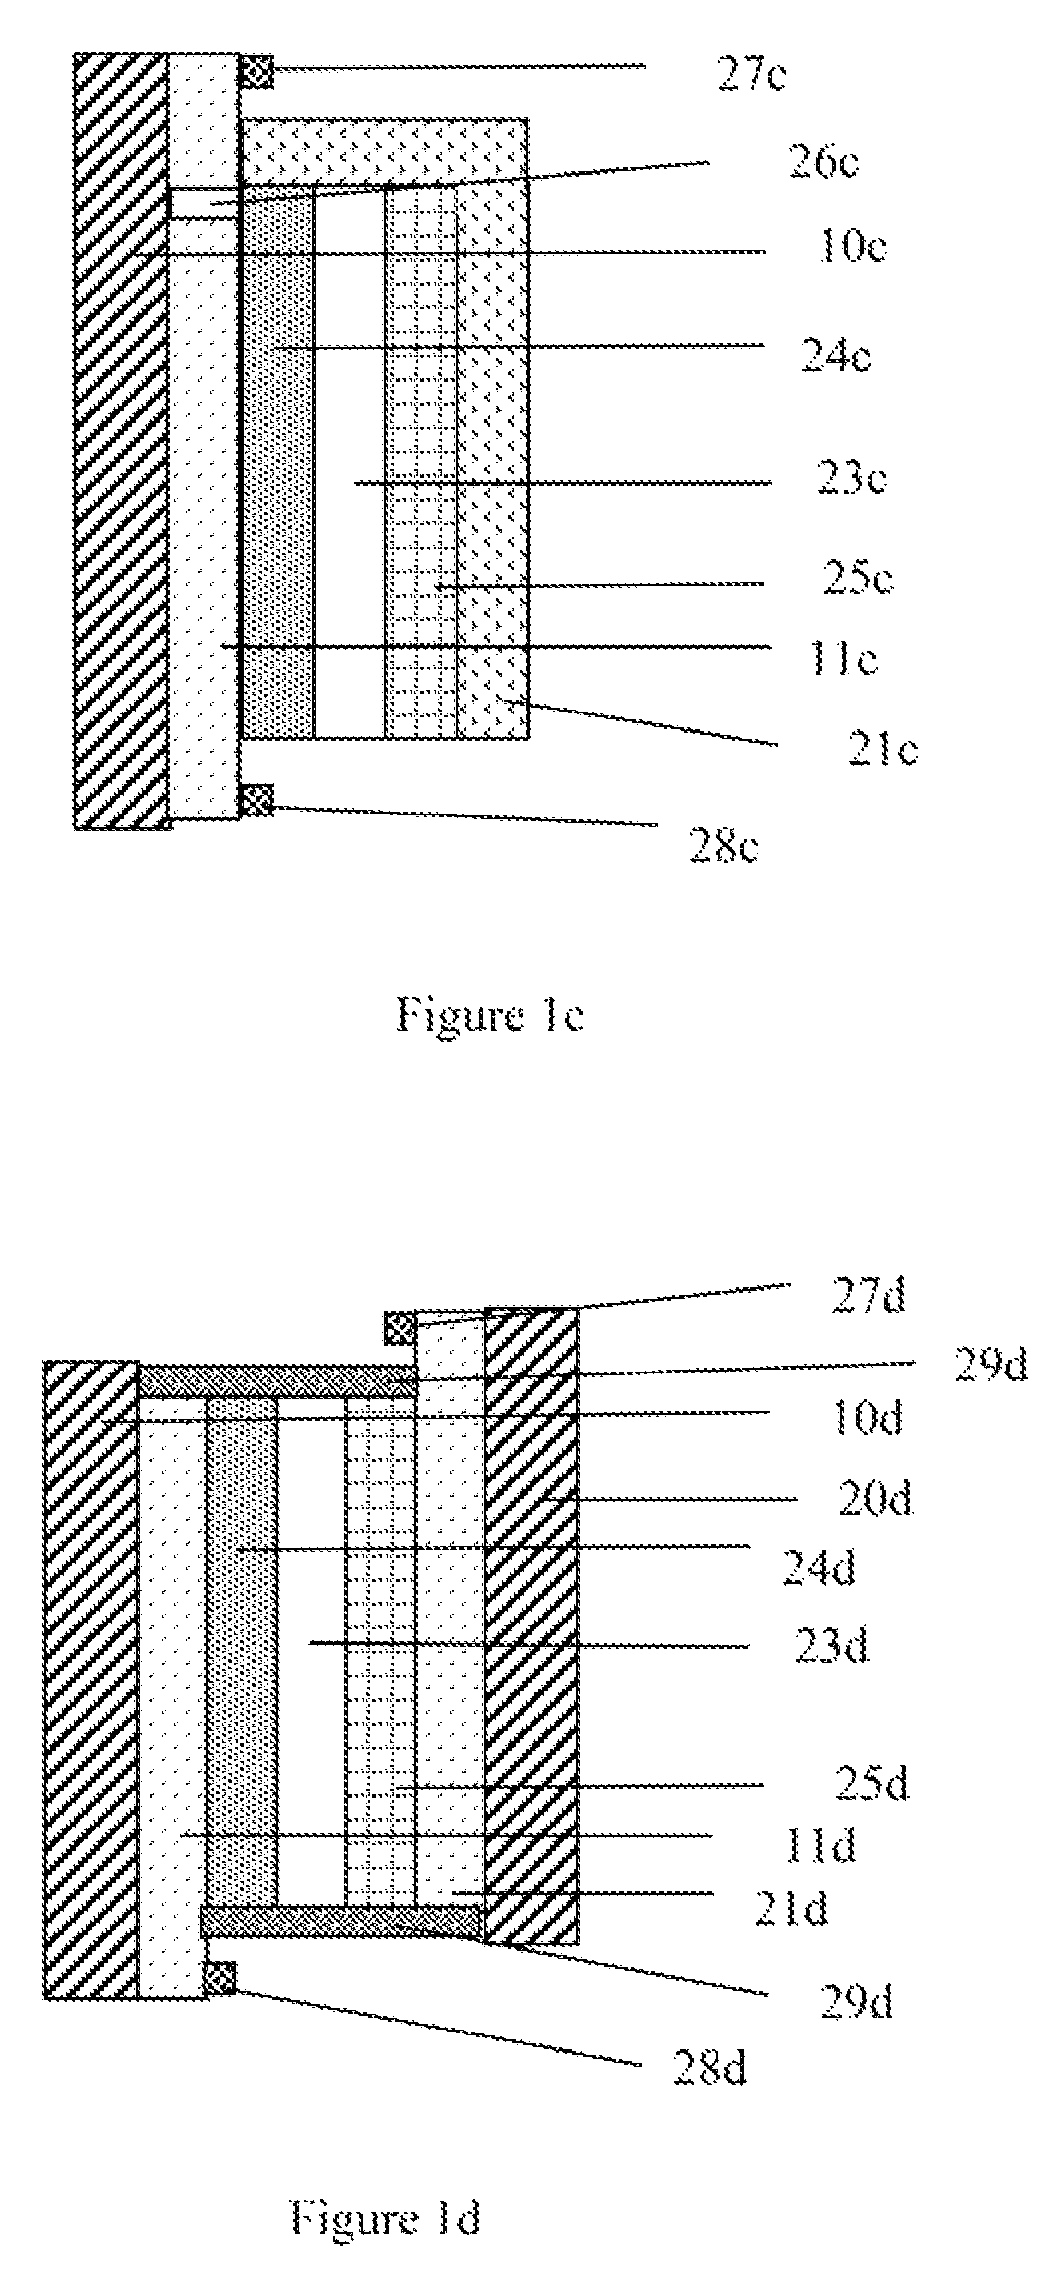 Conductive busbars and sealants for chromogenic devices